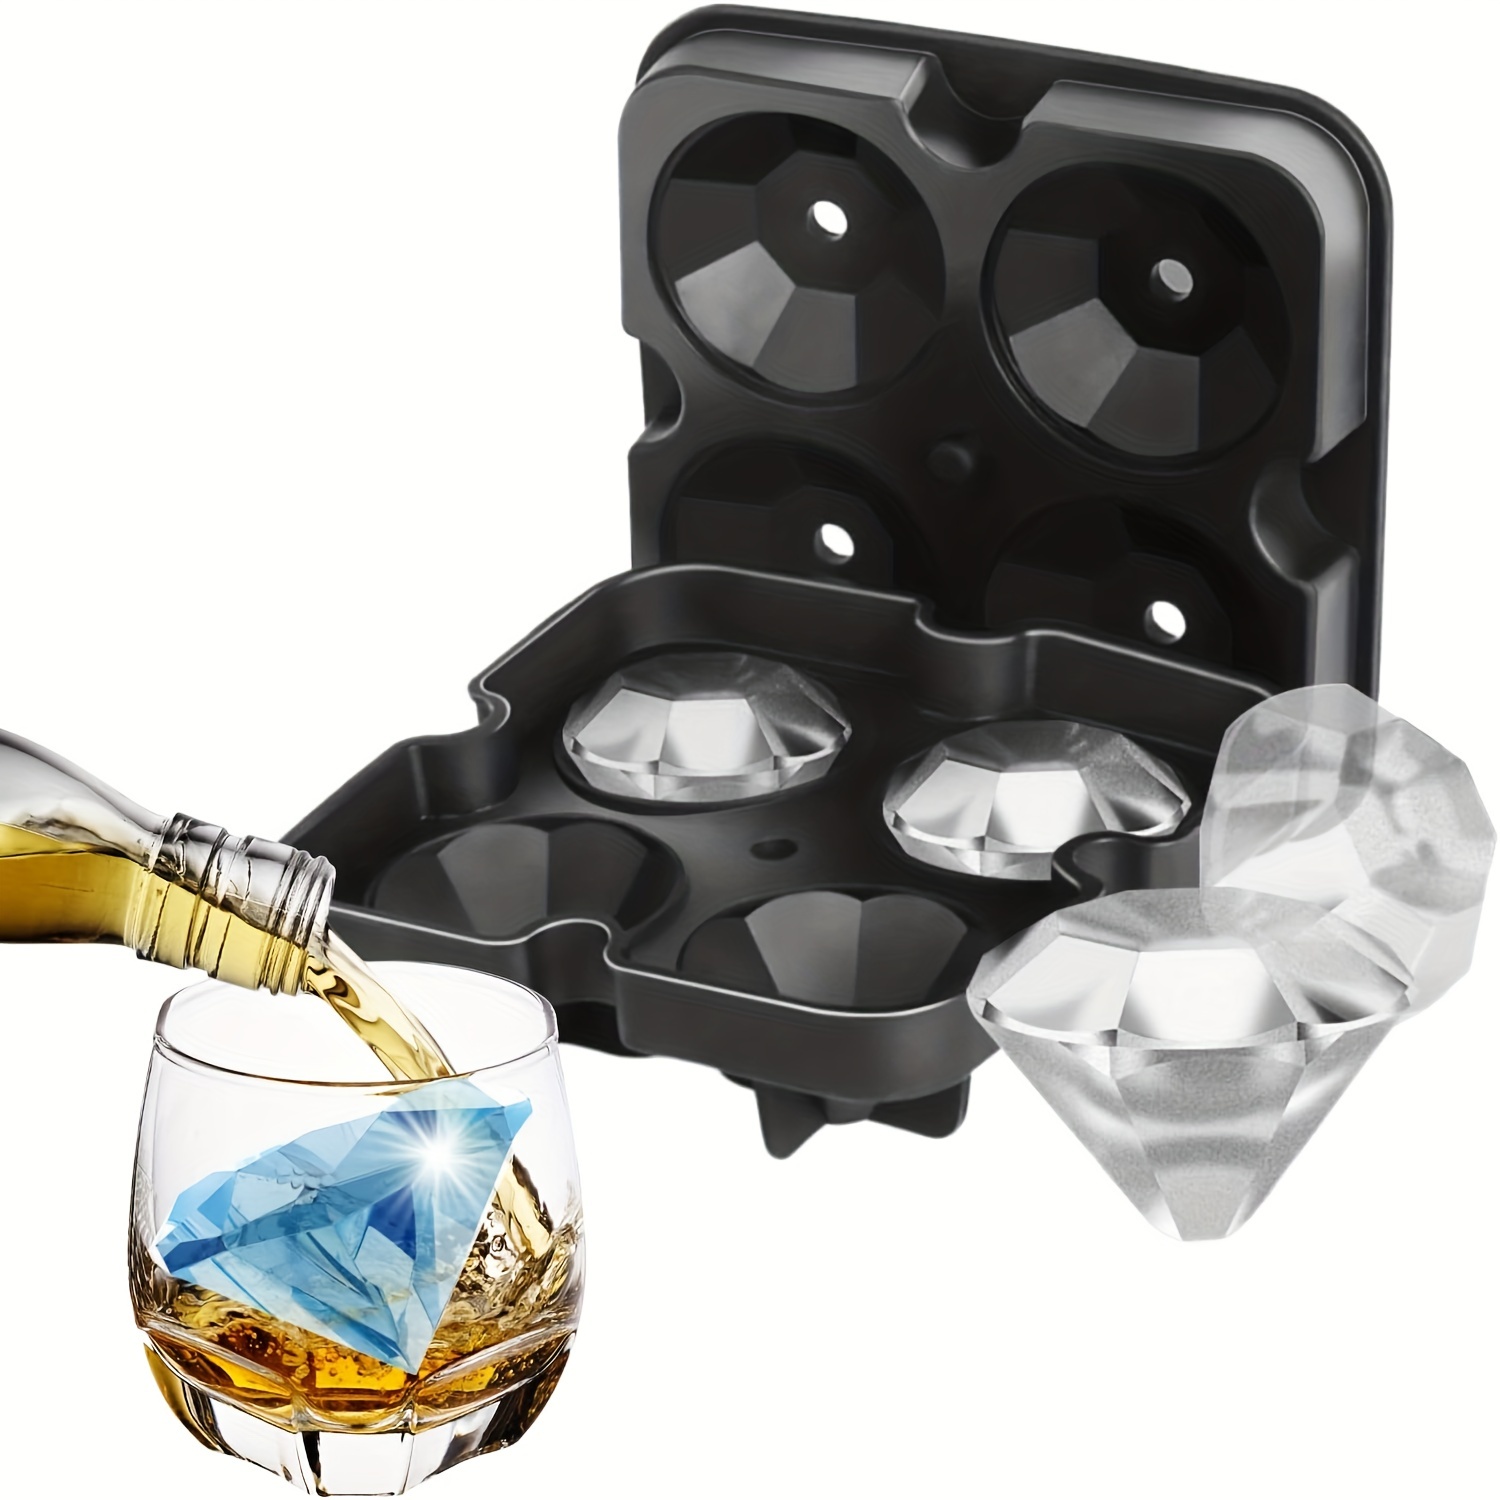 Funny Ice Cube Maker Silicone, Ice Cube Tray Fun Shapes